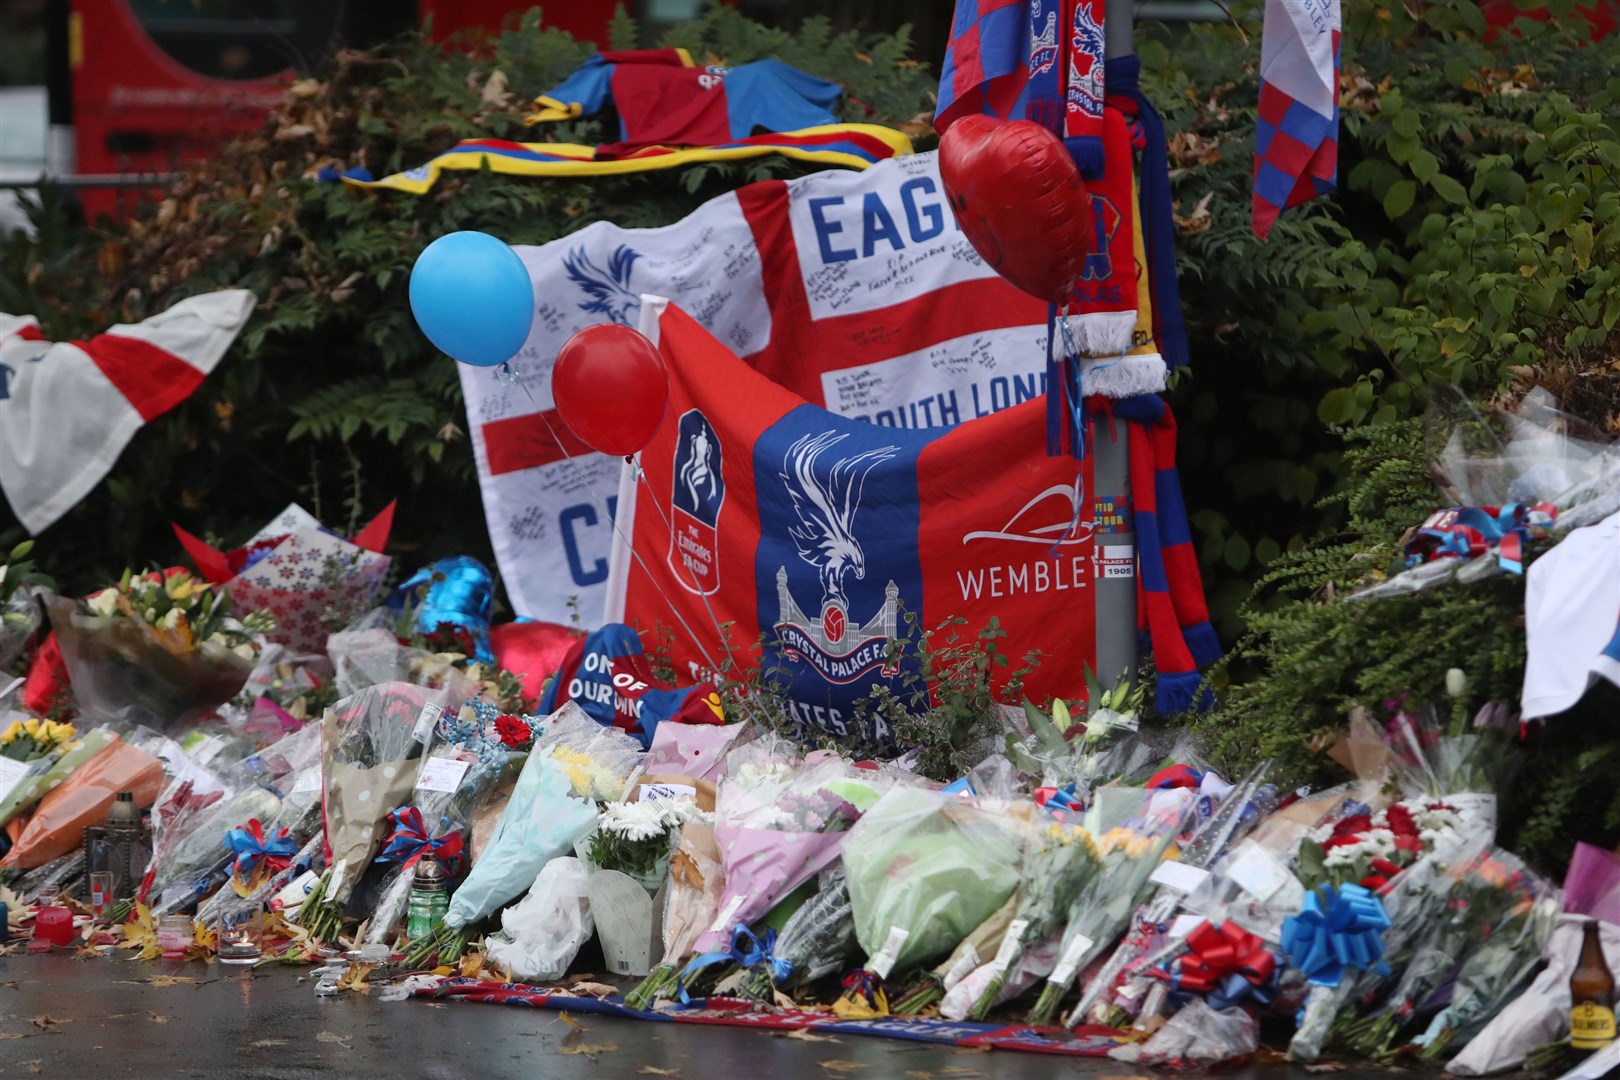 Floral tributes and Crystal Palace football colours were left near the scene where a tram crashed, killing seven people, in Croydon, south London (Steve Parsons/PA)